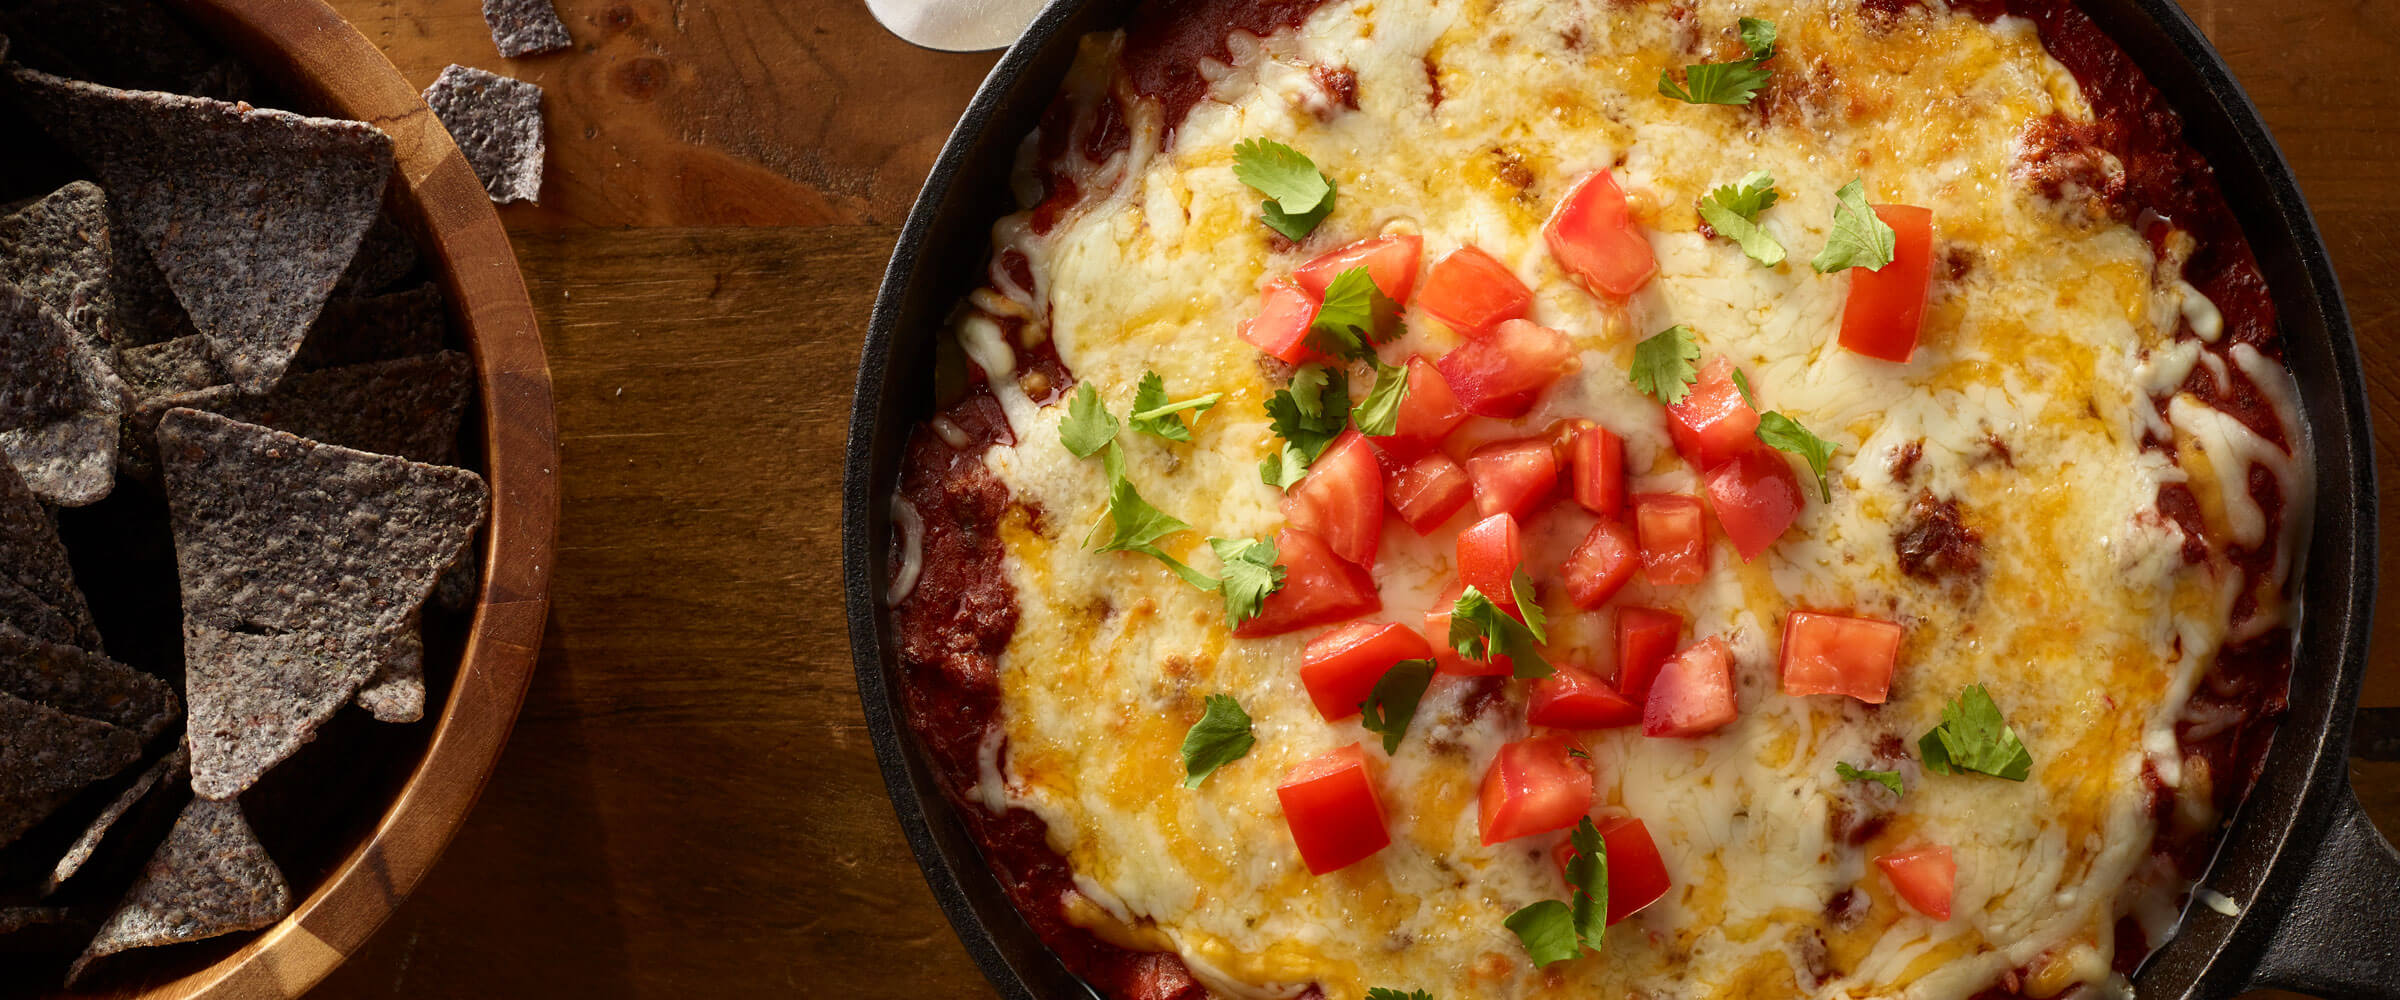 Layered Chili Cheese Dip in skillet topped with tomatoes with bowl of chips on the side